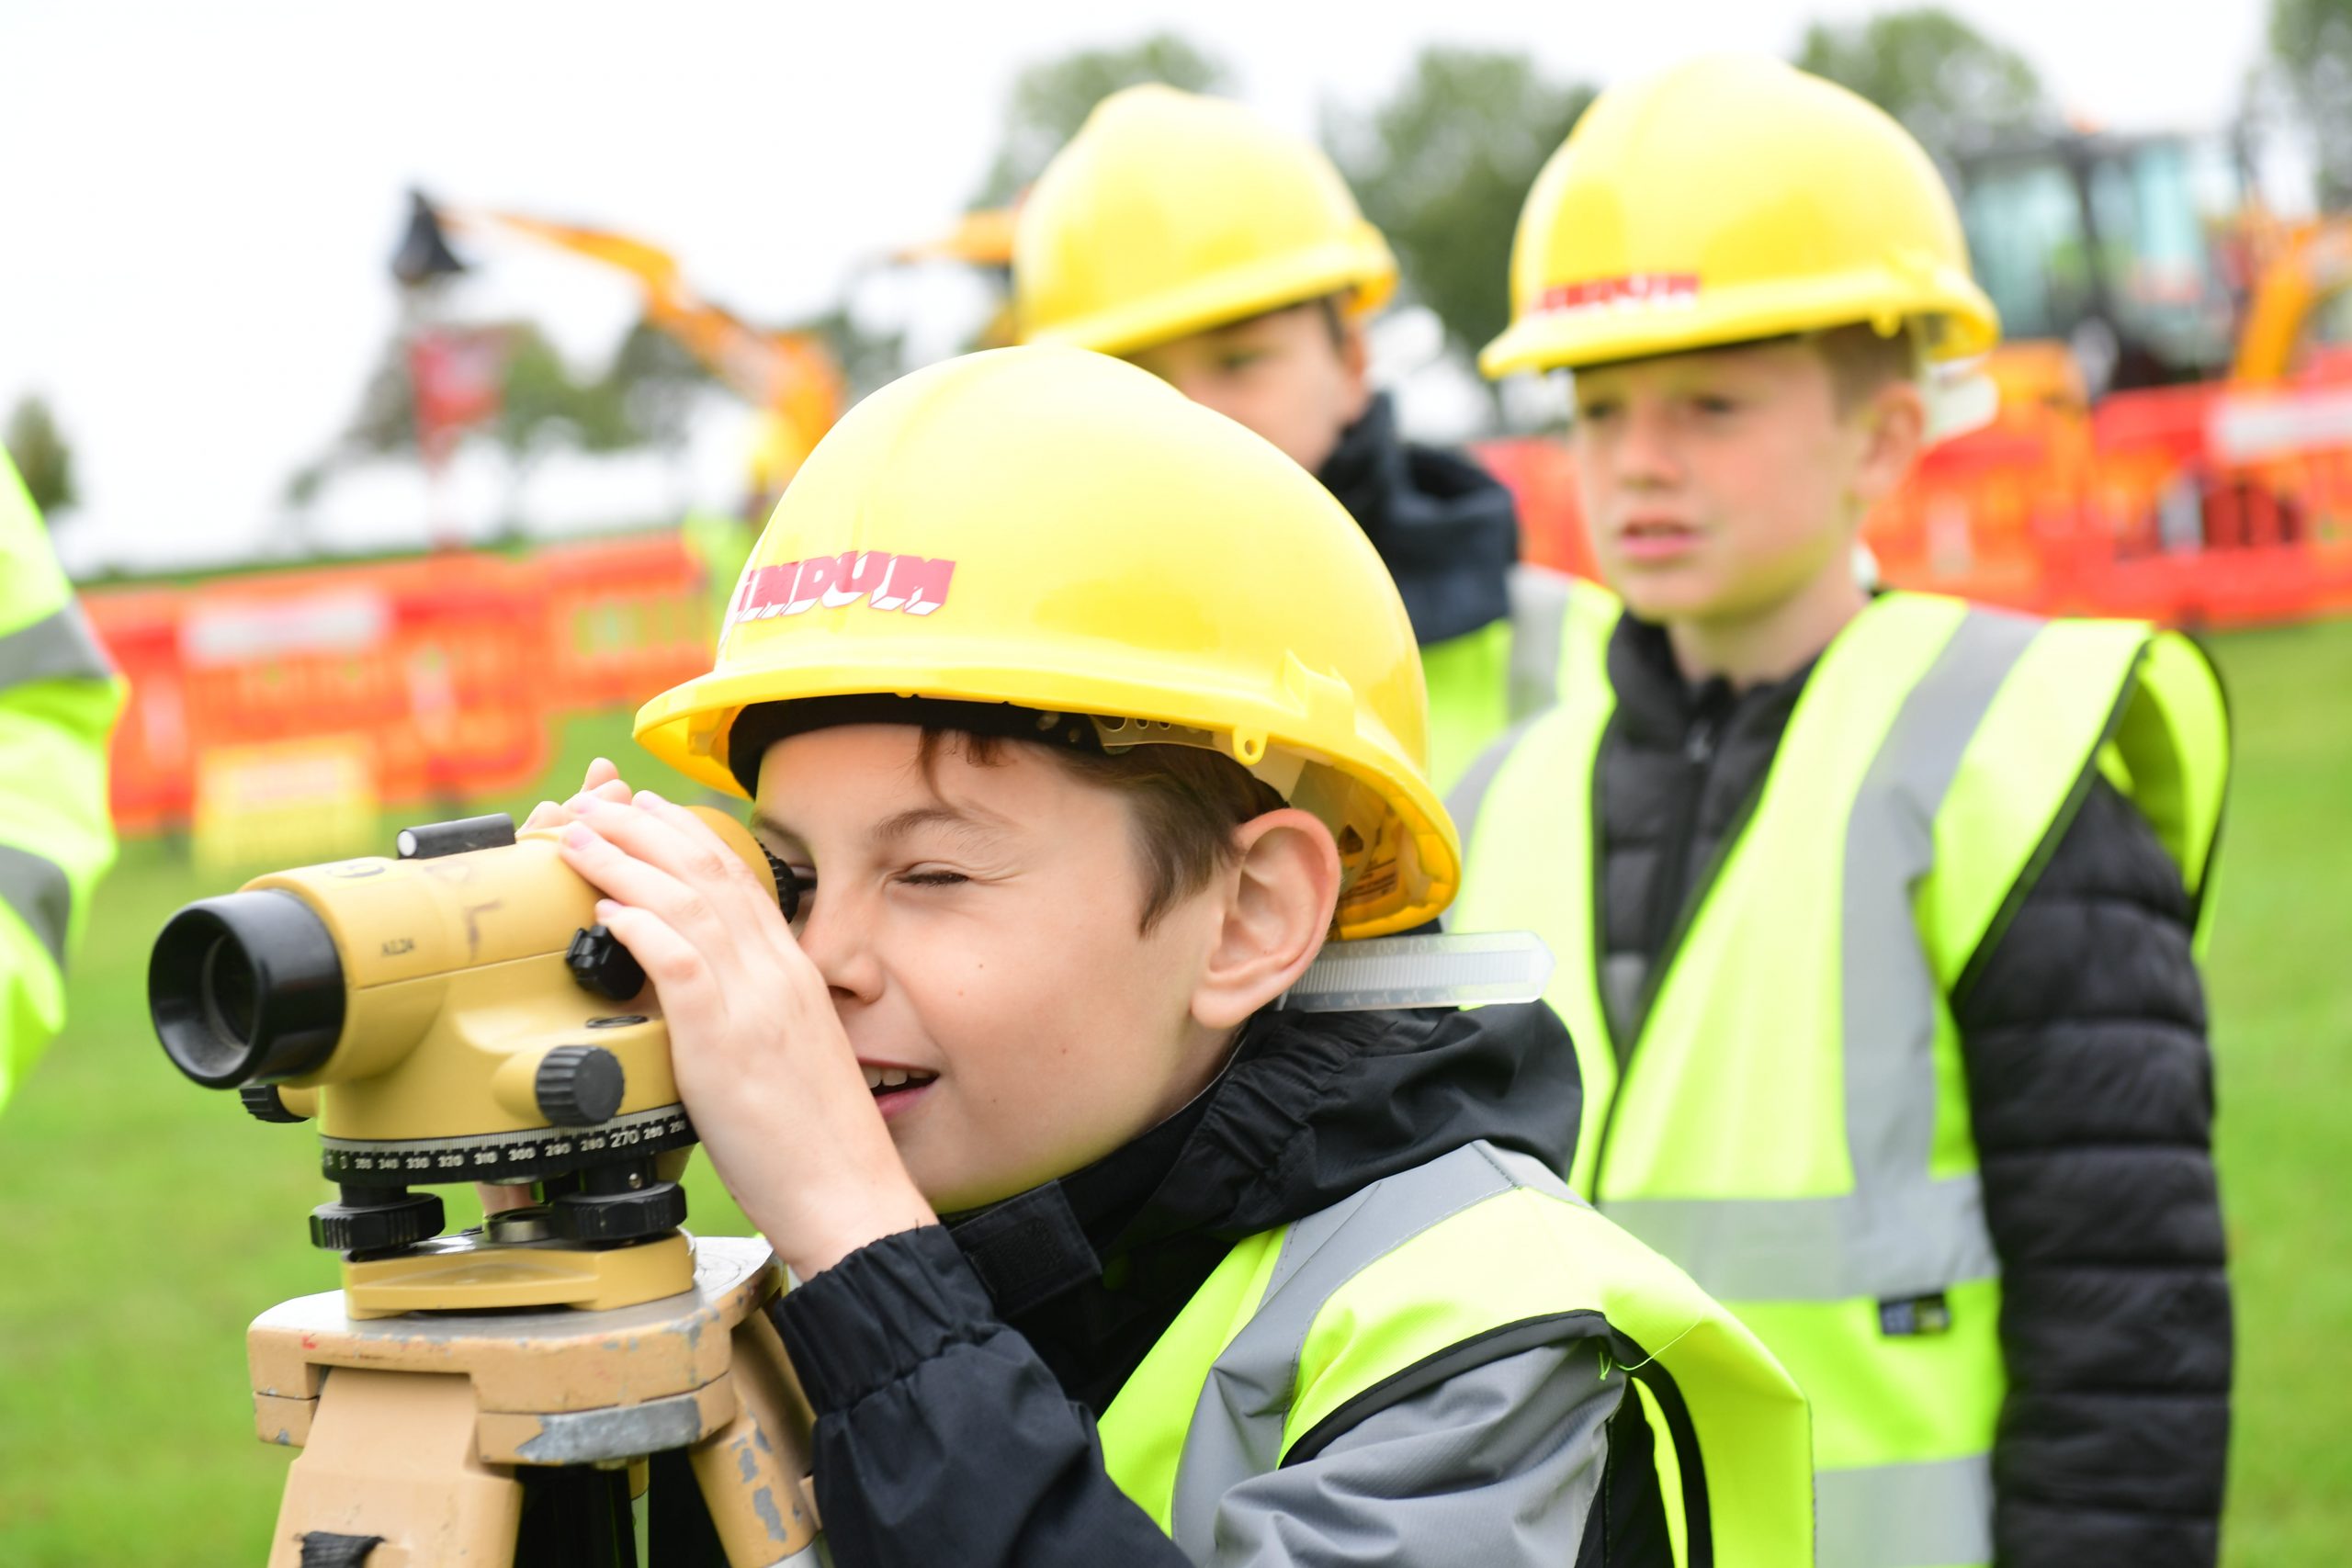 Construction Week will lay foundations for careers in construction